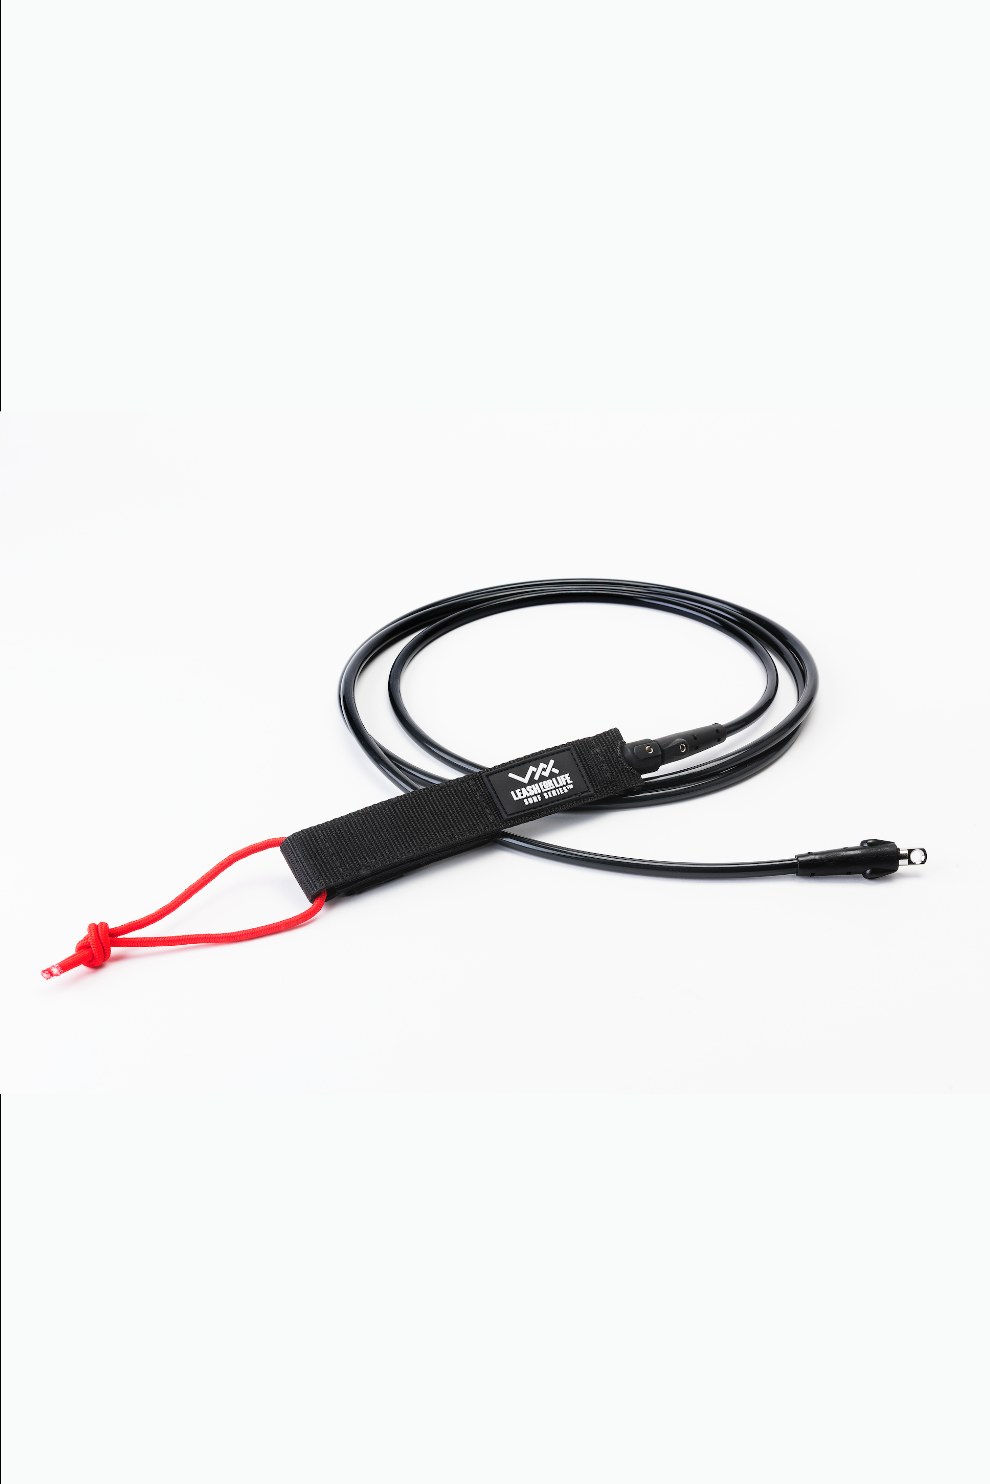 9ft ‘Leash for Life’ Leash Cord with Rail Saver